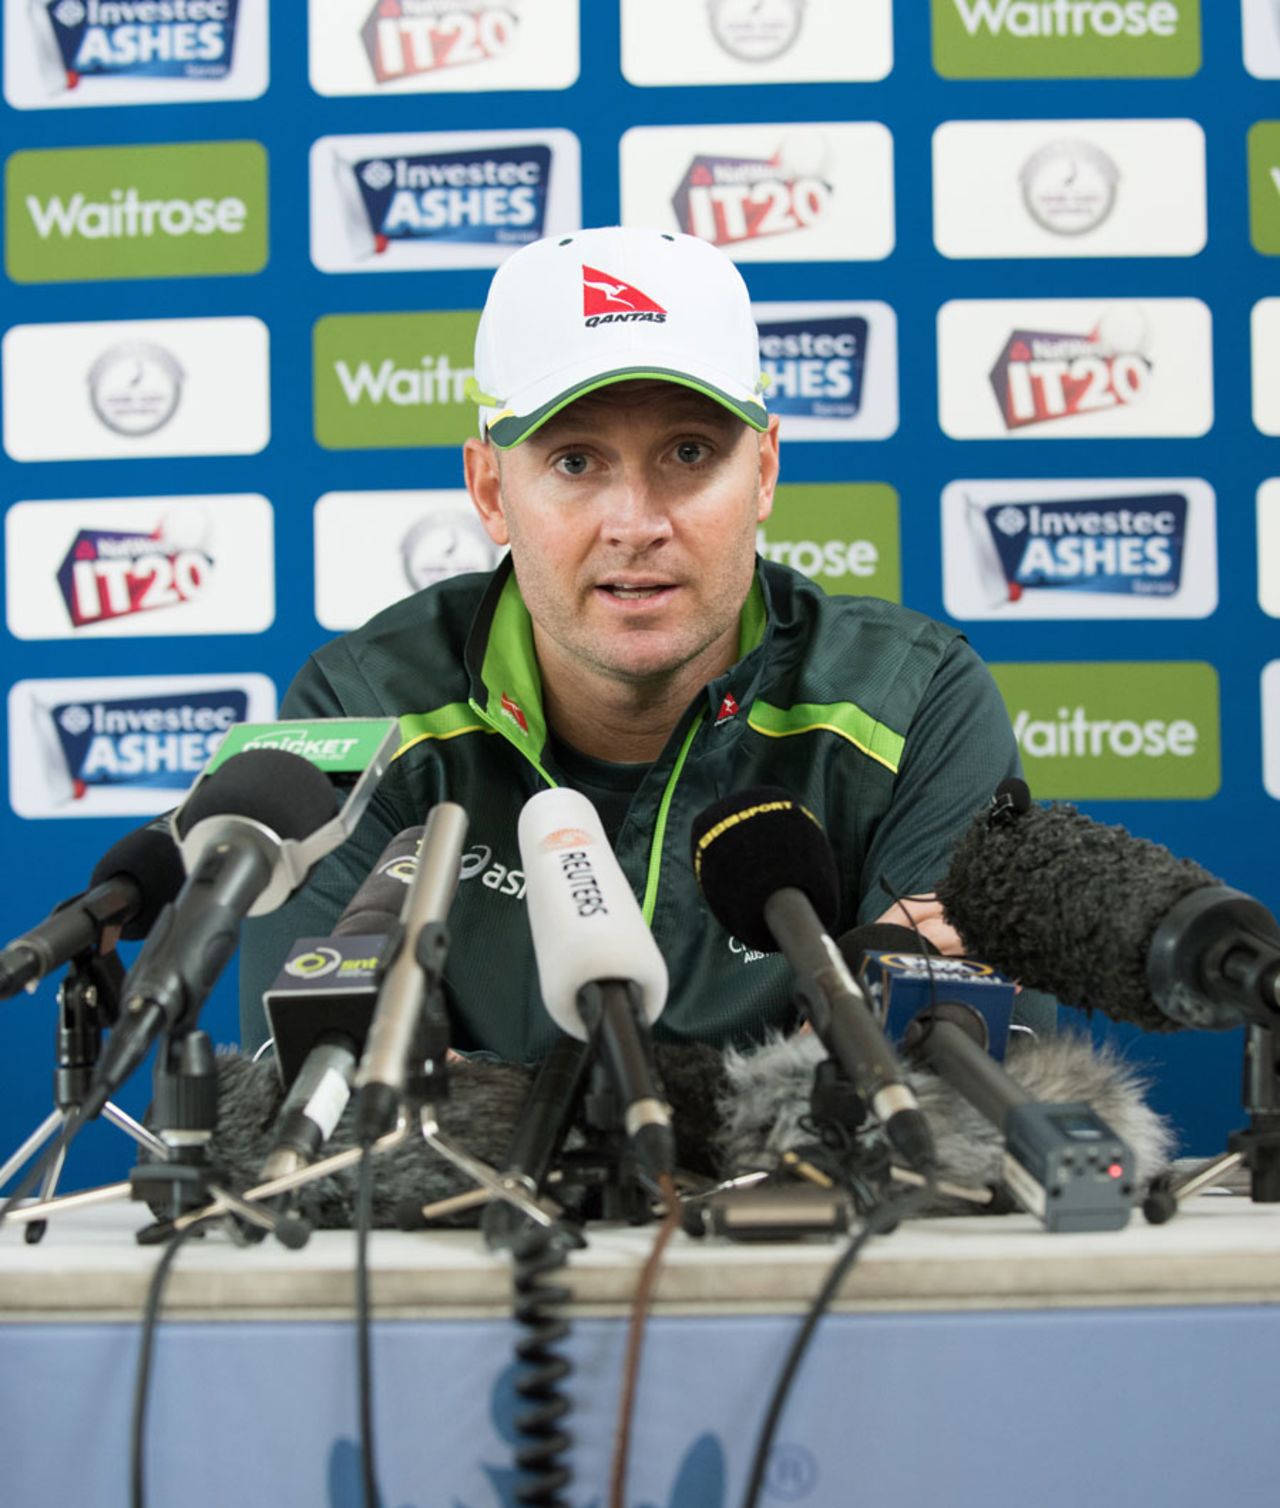 Michael Clarke addresses the media at a press conference, Watford, England, June 21, 2015